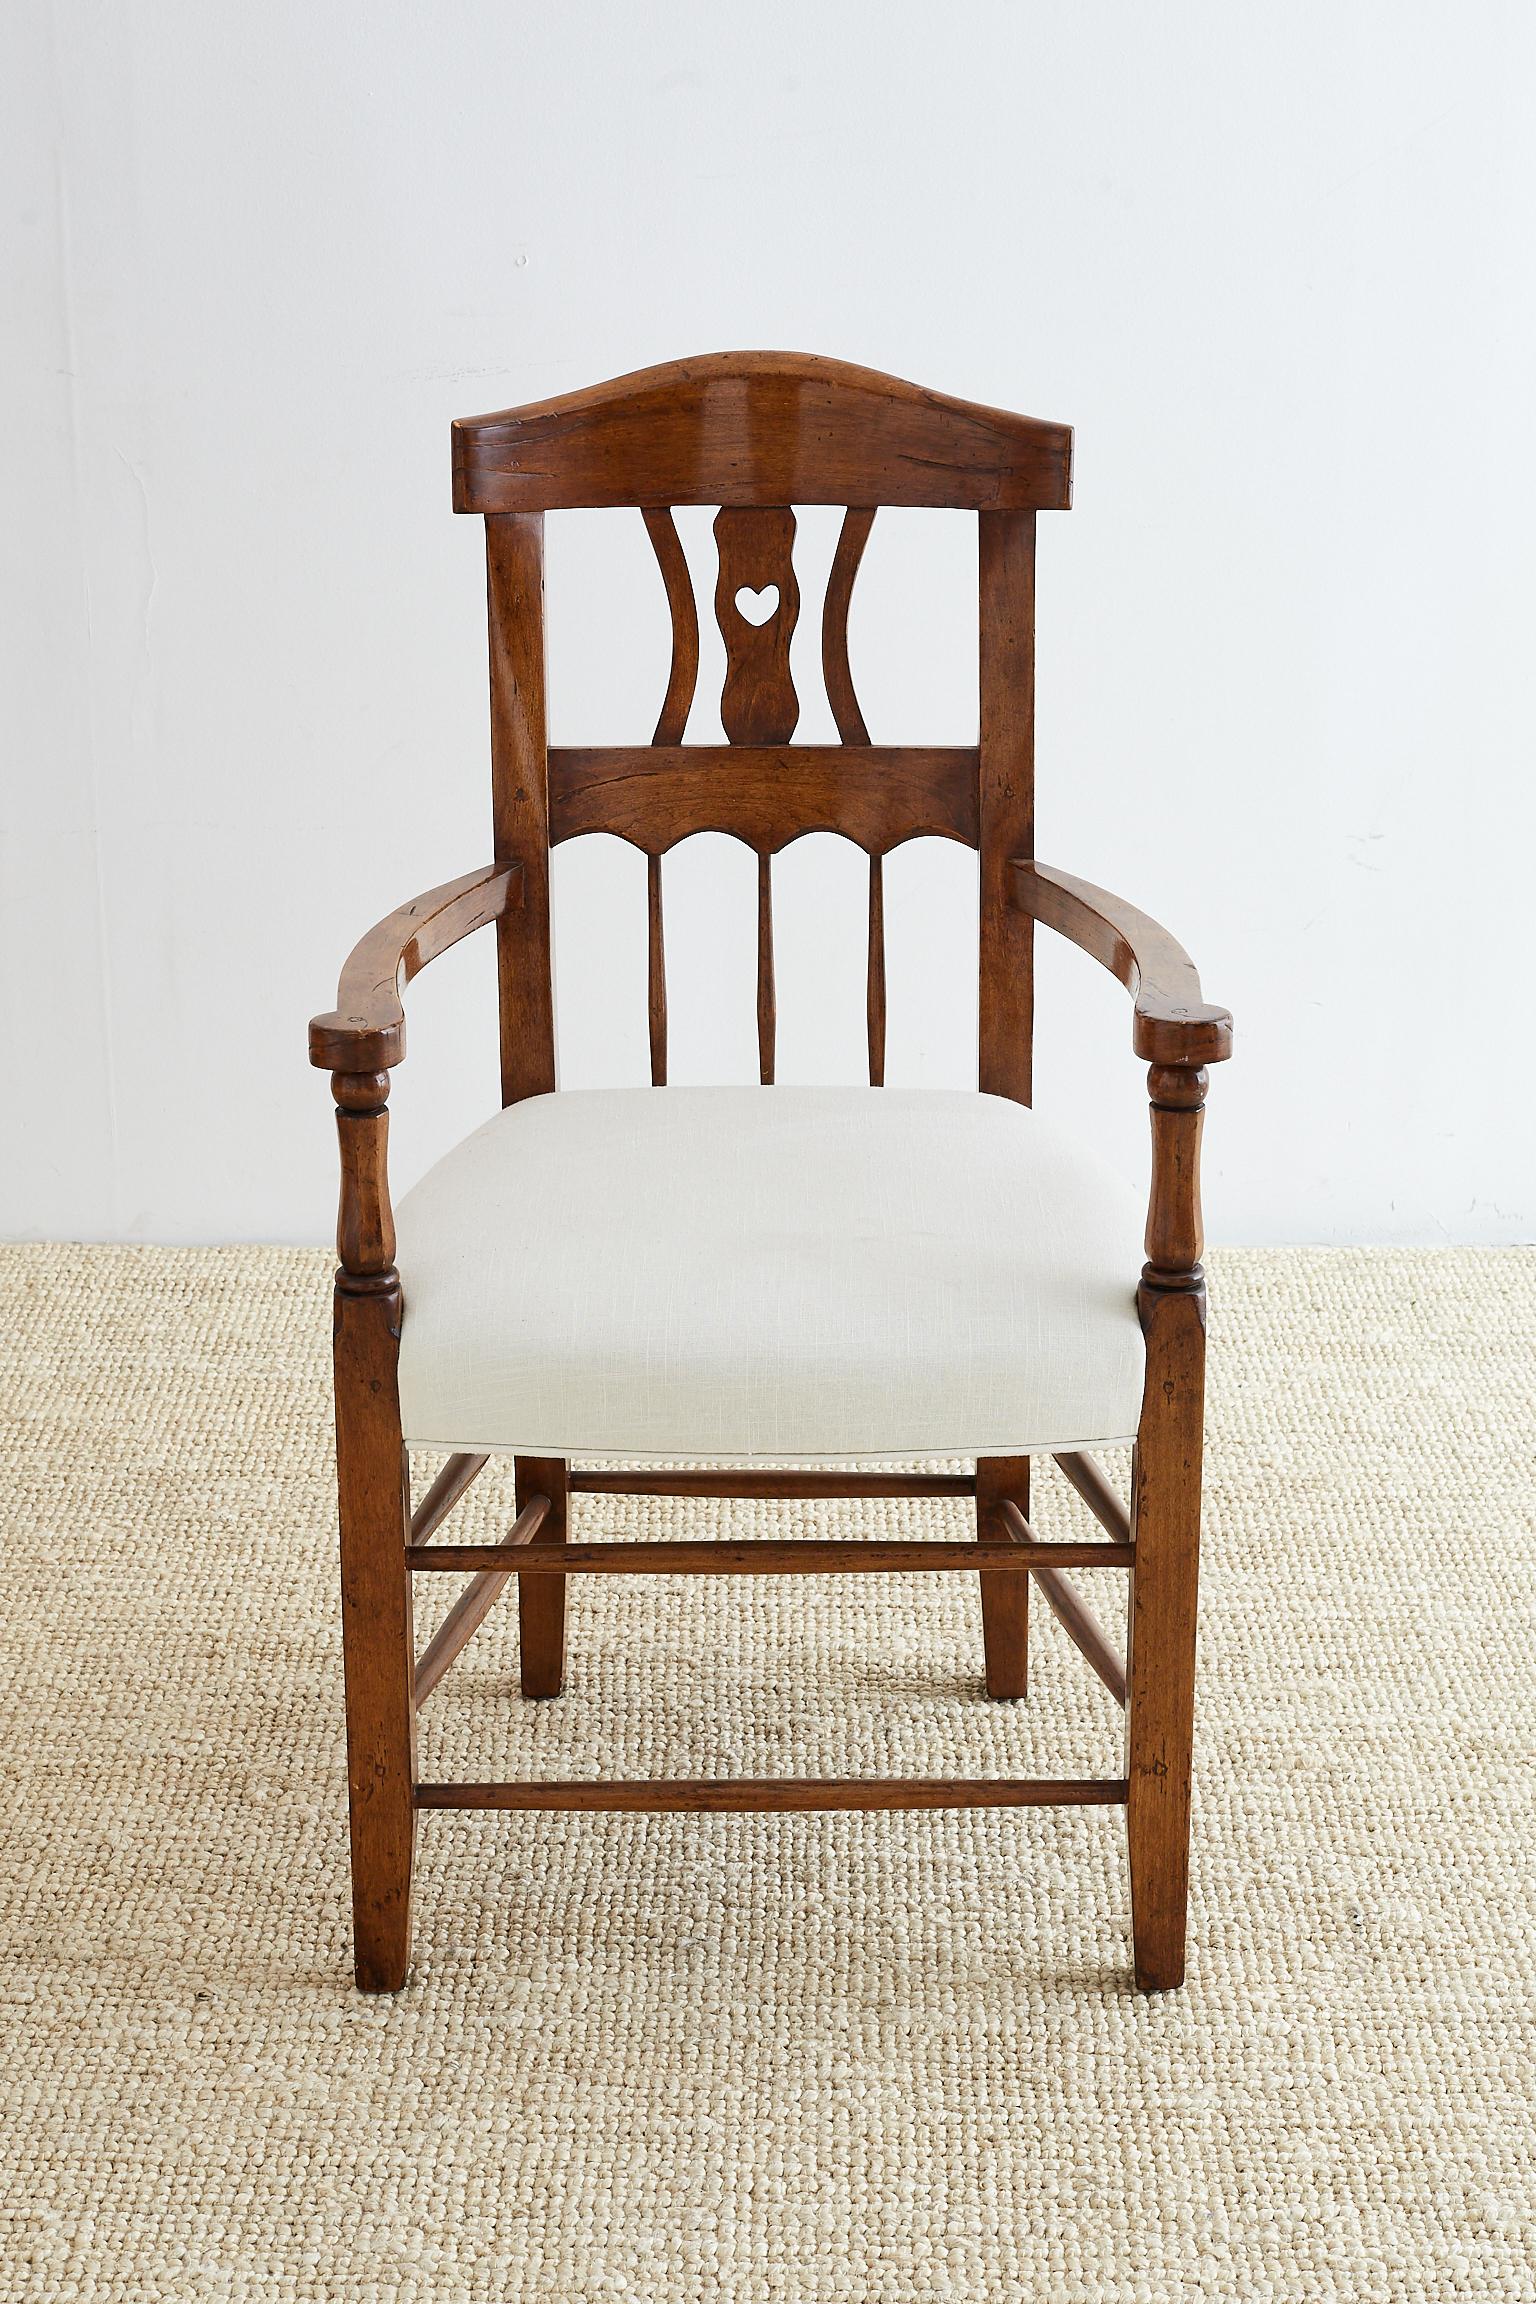 19th century French country armchair carved from fruitwood. Features a curved back with a whimsical carved heart backsplat. Constructed with wood peg joinery and newly upholstered in white linen. Recently renovated and finished in a rich dark stain.